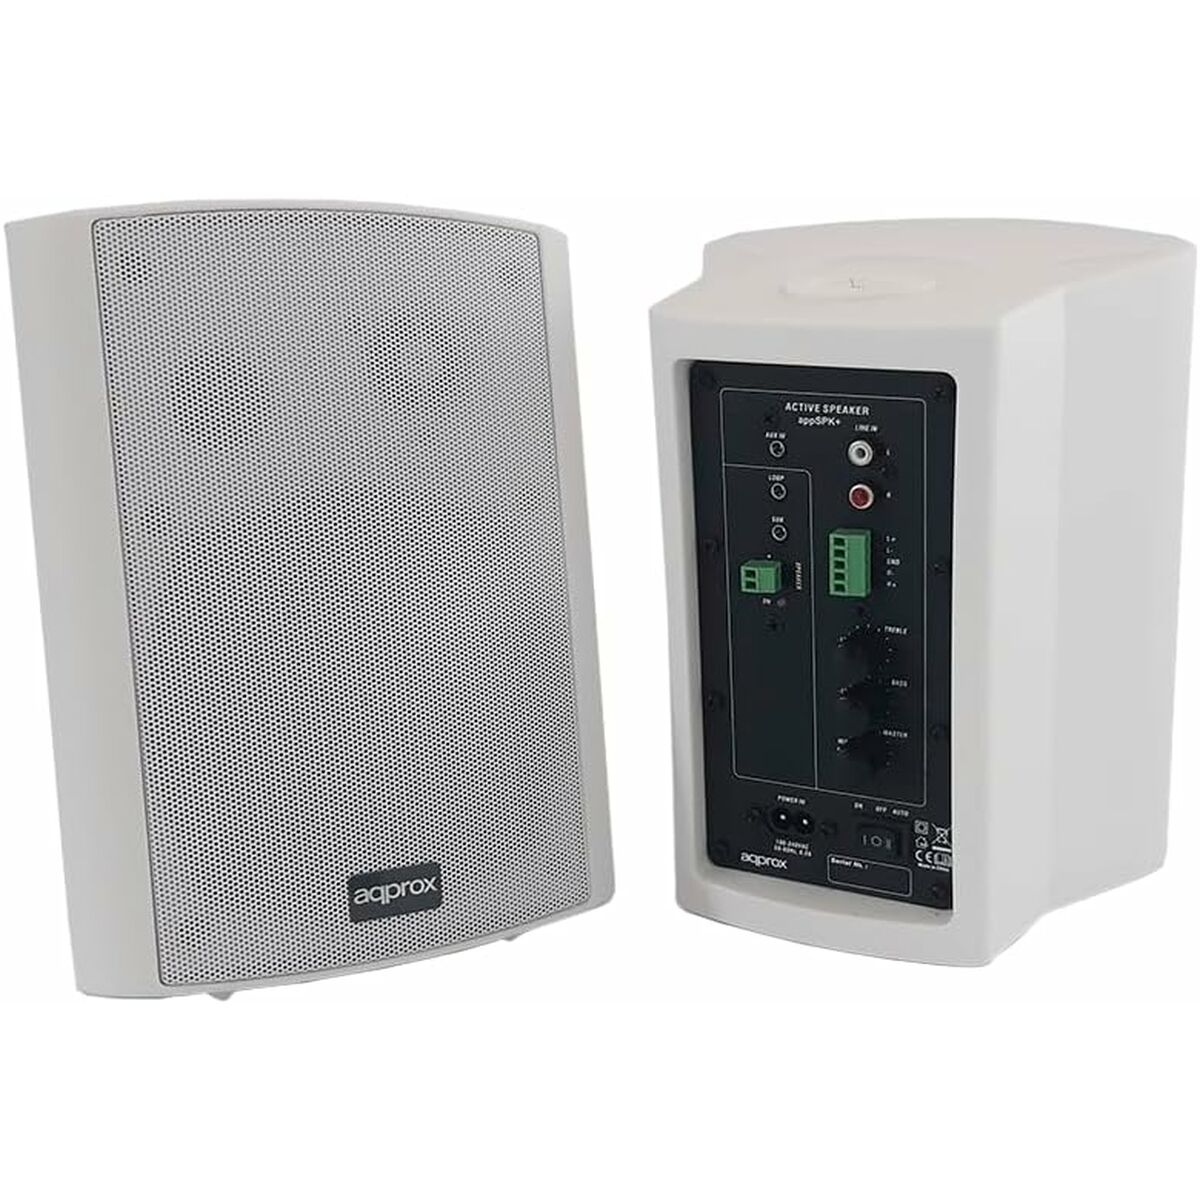 Speakers approx! APPSPK+ 30 W, approx!, Electronics, Audio and Hi-Fi equipment, speakers-approx-appspk-30-w, Brand_approx!, category-reference-2609, category-reference-2637, category-reference-2882, category-reference-t-19653, category-reference-t-7441, category-reference-t-7442, category-reference-t-7447, cinema and television, Condition_NEW, entertainment, music, Price_100 - 200, Teleworking, RiotNook